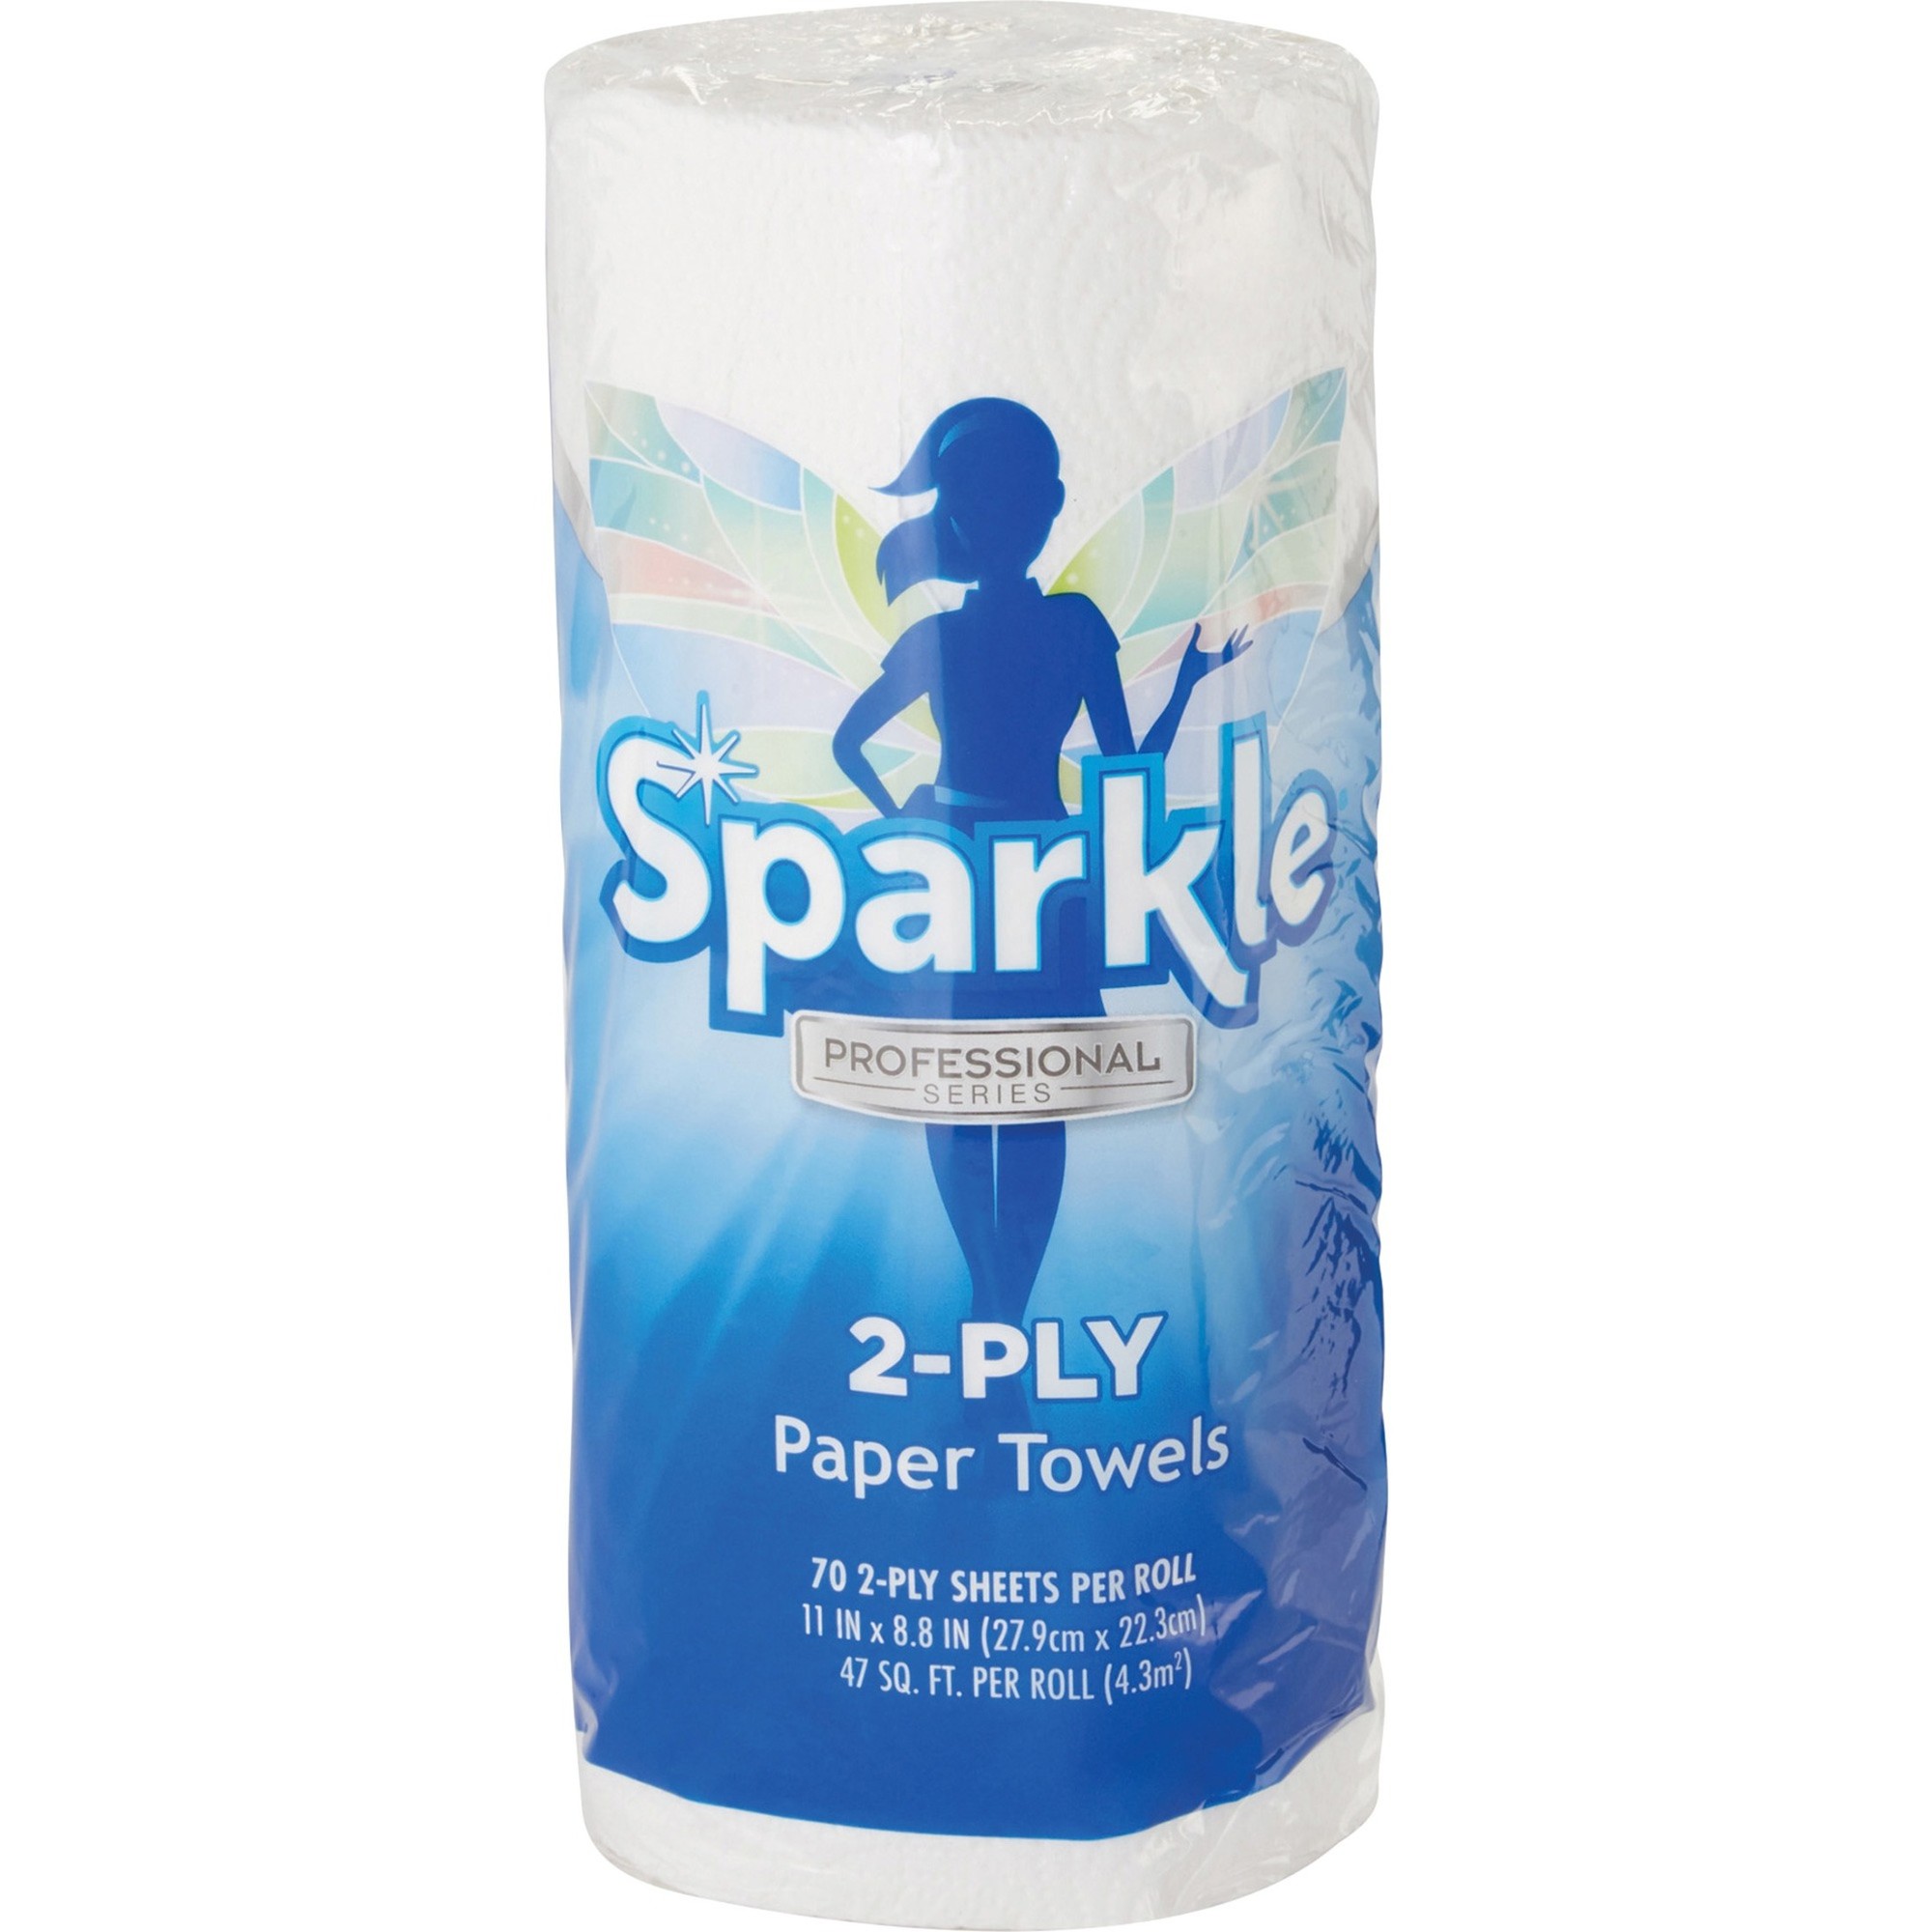 Sparkle ps Perforated Paper Towels, 2-Ply, 11x8 4/5, White,70 Sheets,30 Rolls/Ct